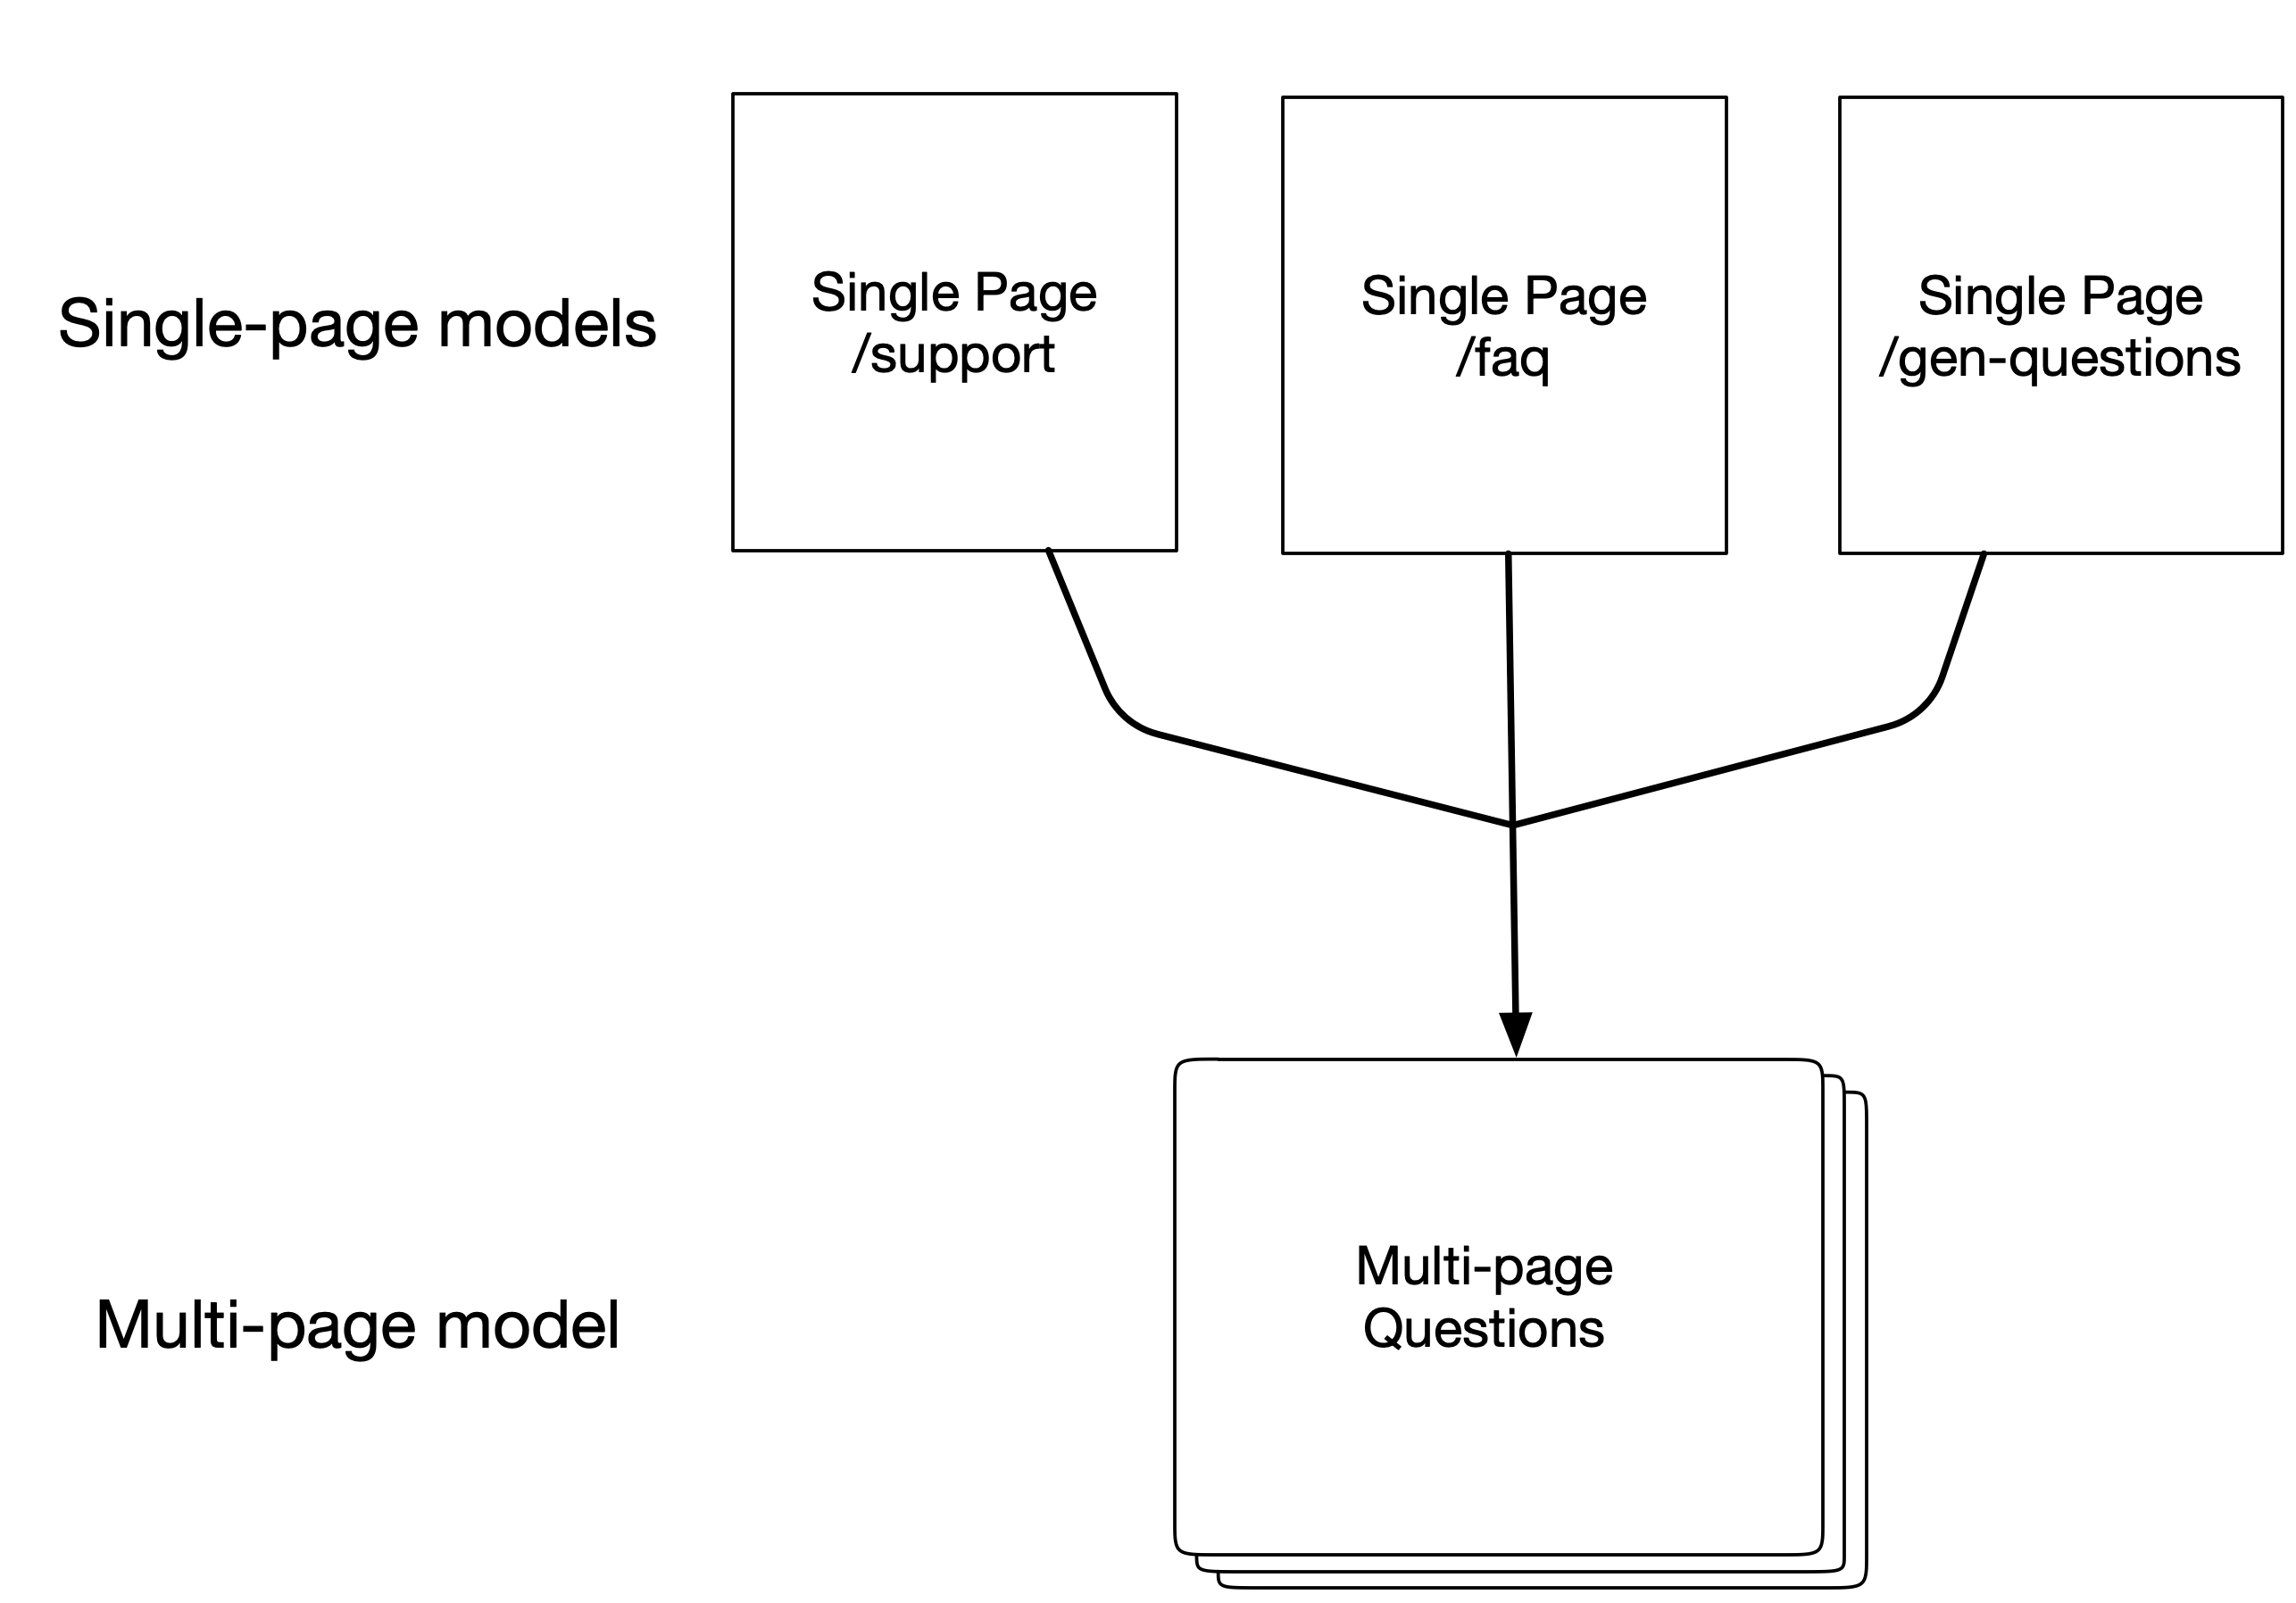 All content models are top-level and all items are housed in a single multi-page content model.